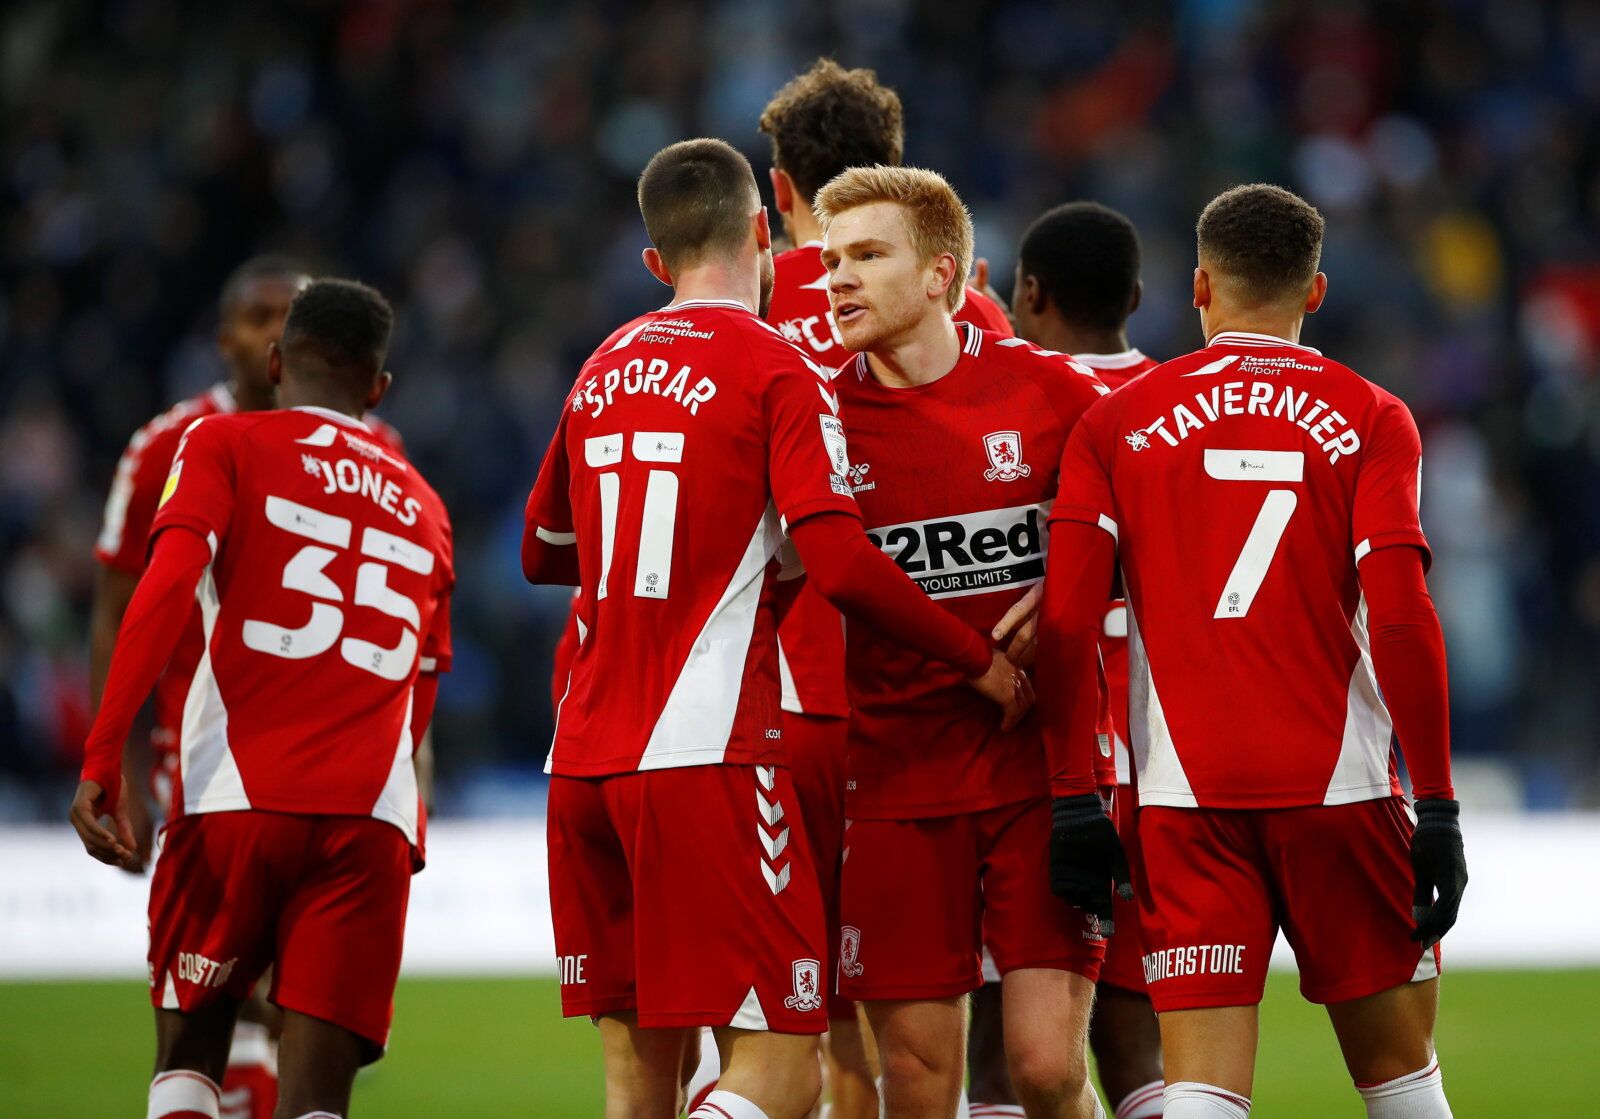 Soccer Football - Championship - Huddersfield Town v Middlesbrough - John Smith's Stadium, Huddersfield, Britain - November 27, 2021 Middlesbrough's Duncan Watmore celebrates scoring their second goal with teammates  Action Images/Jason Cairnduff